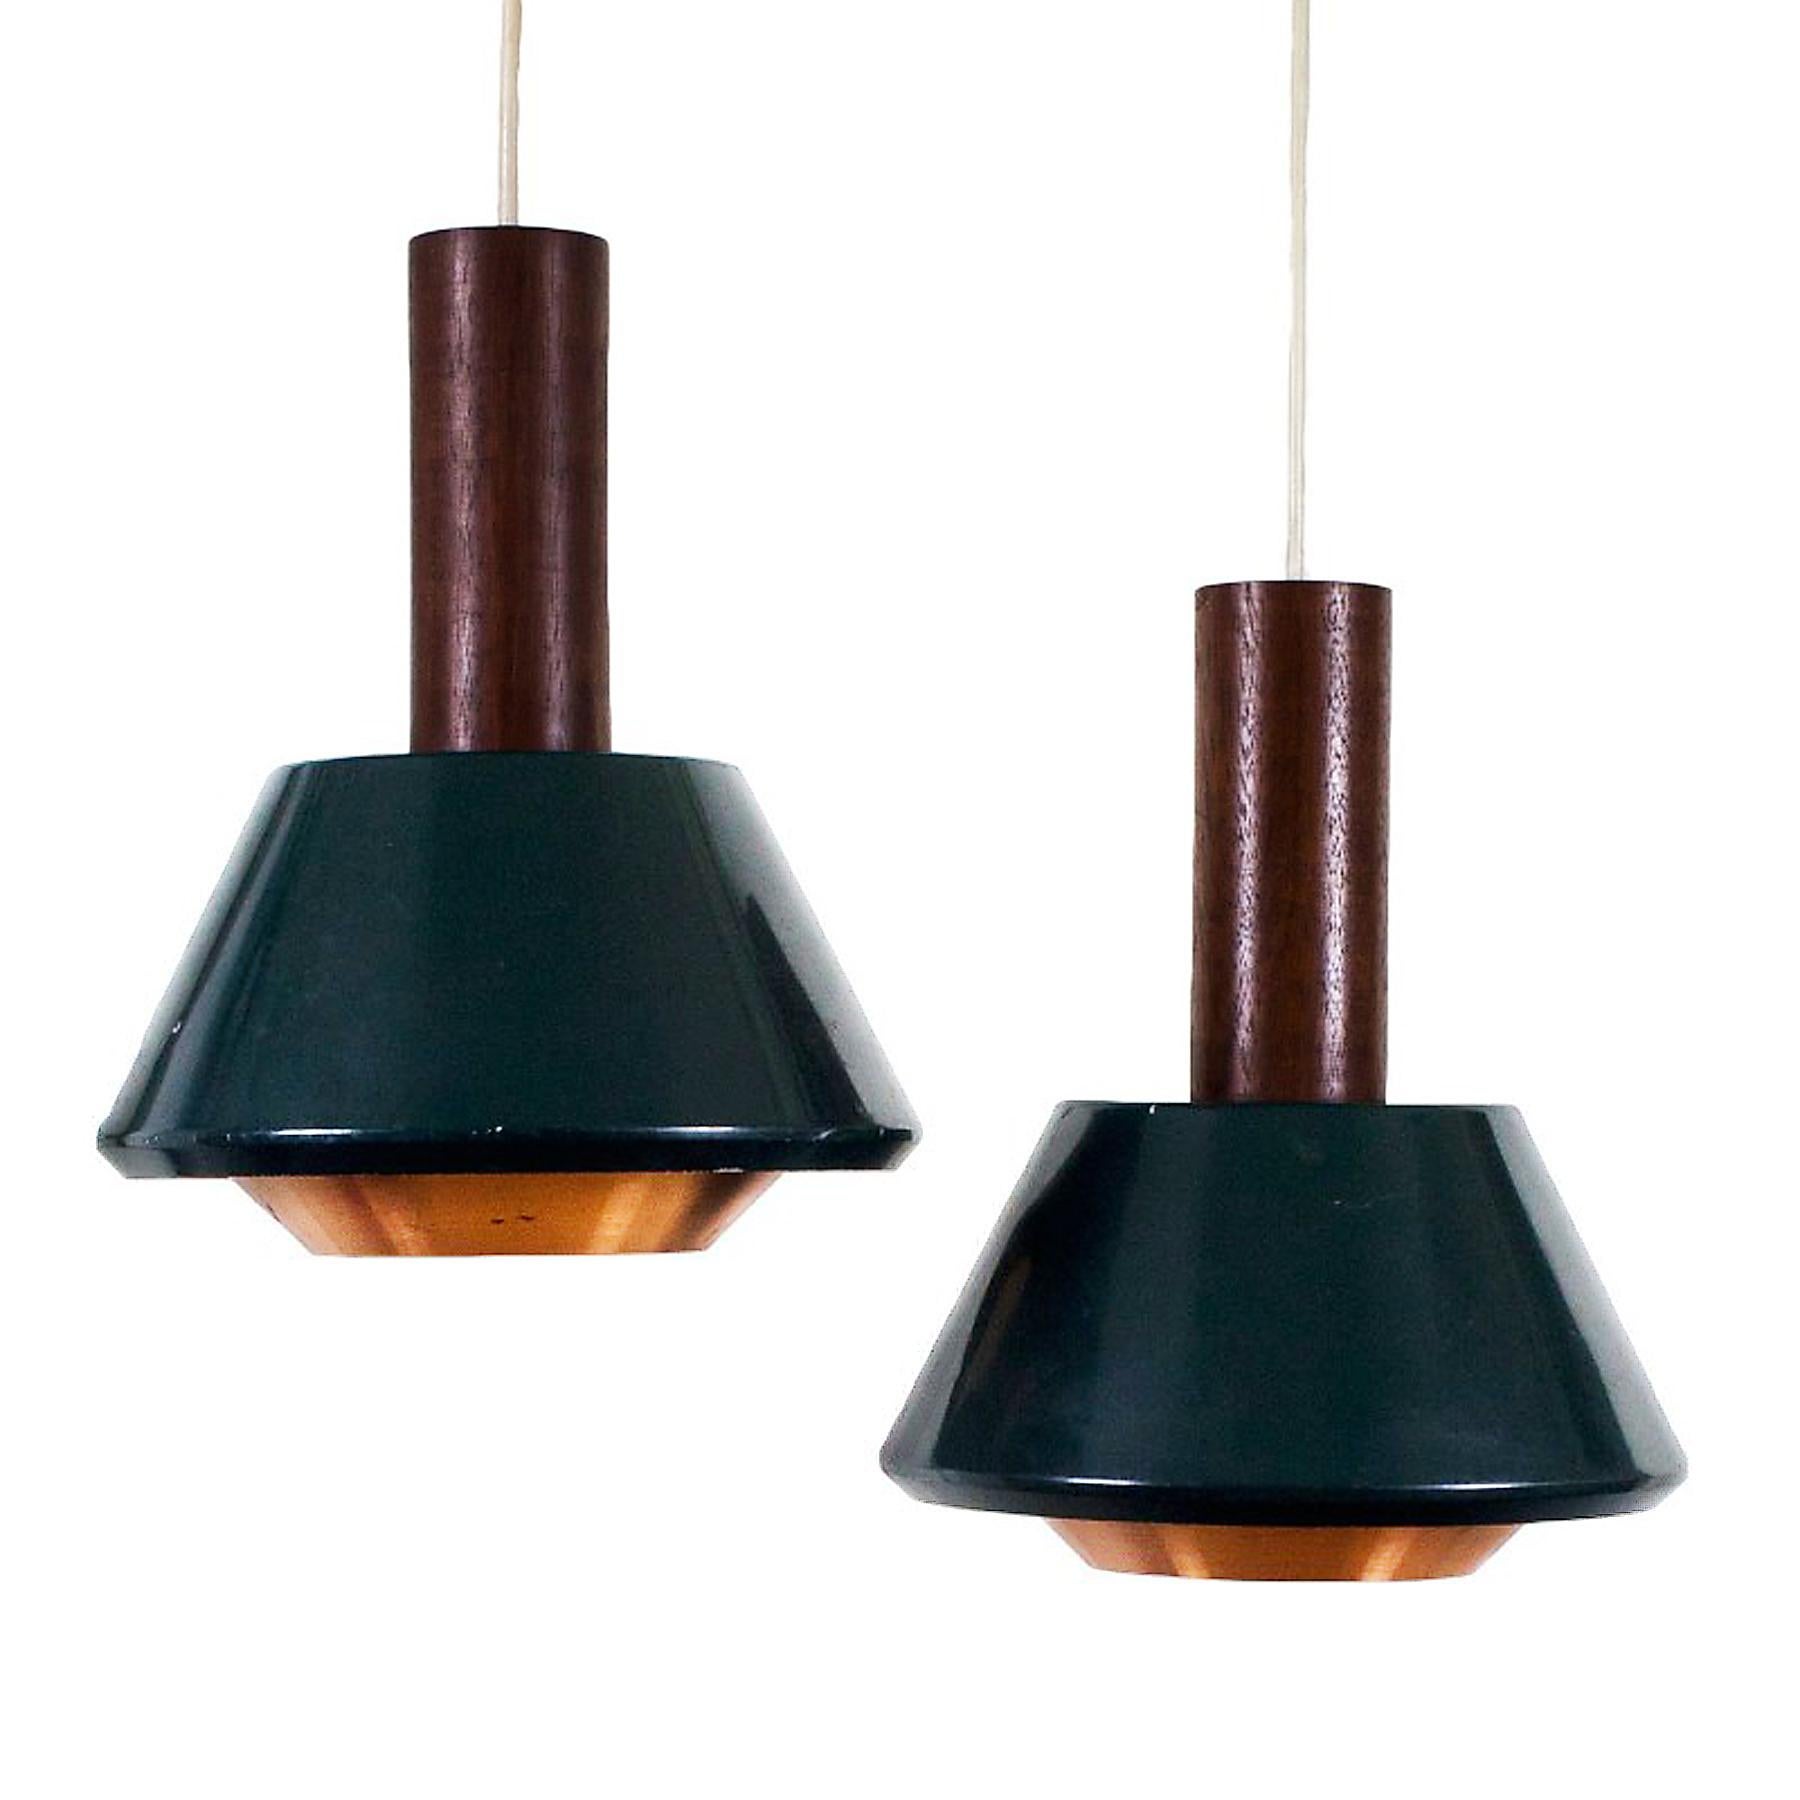 Pair of pendant lights, teak, green lacquered metal and copper diffuser.
Design: Denis Casey

Italy c. 1950